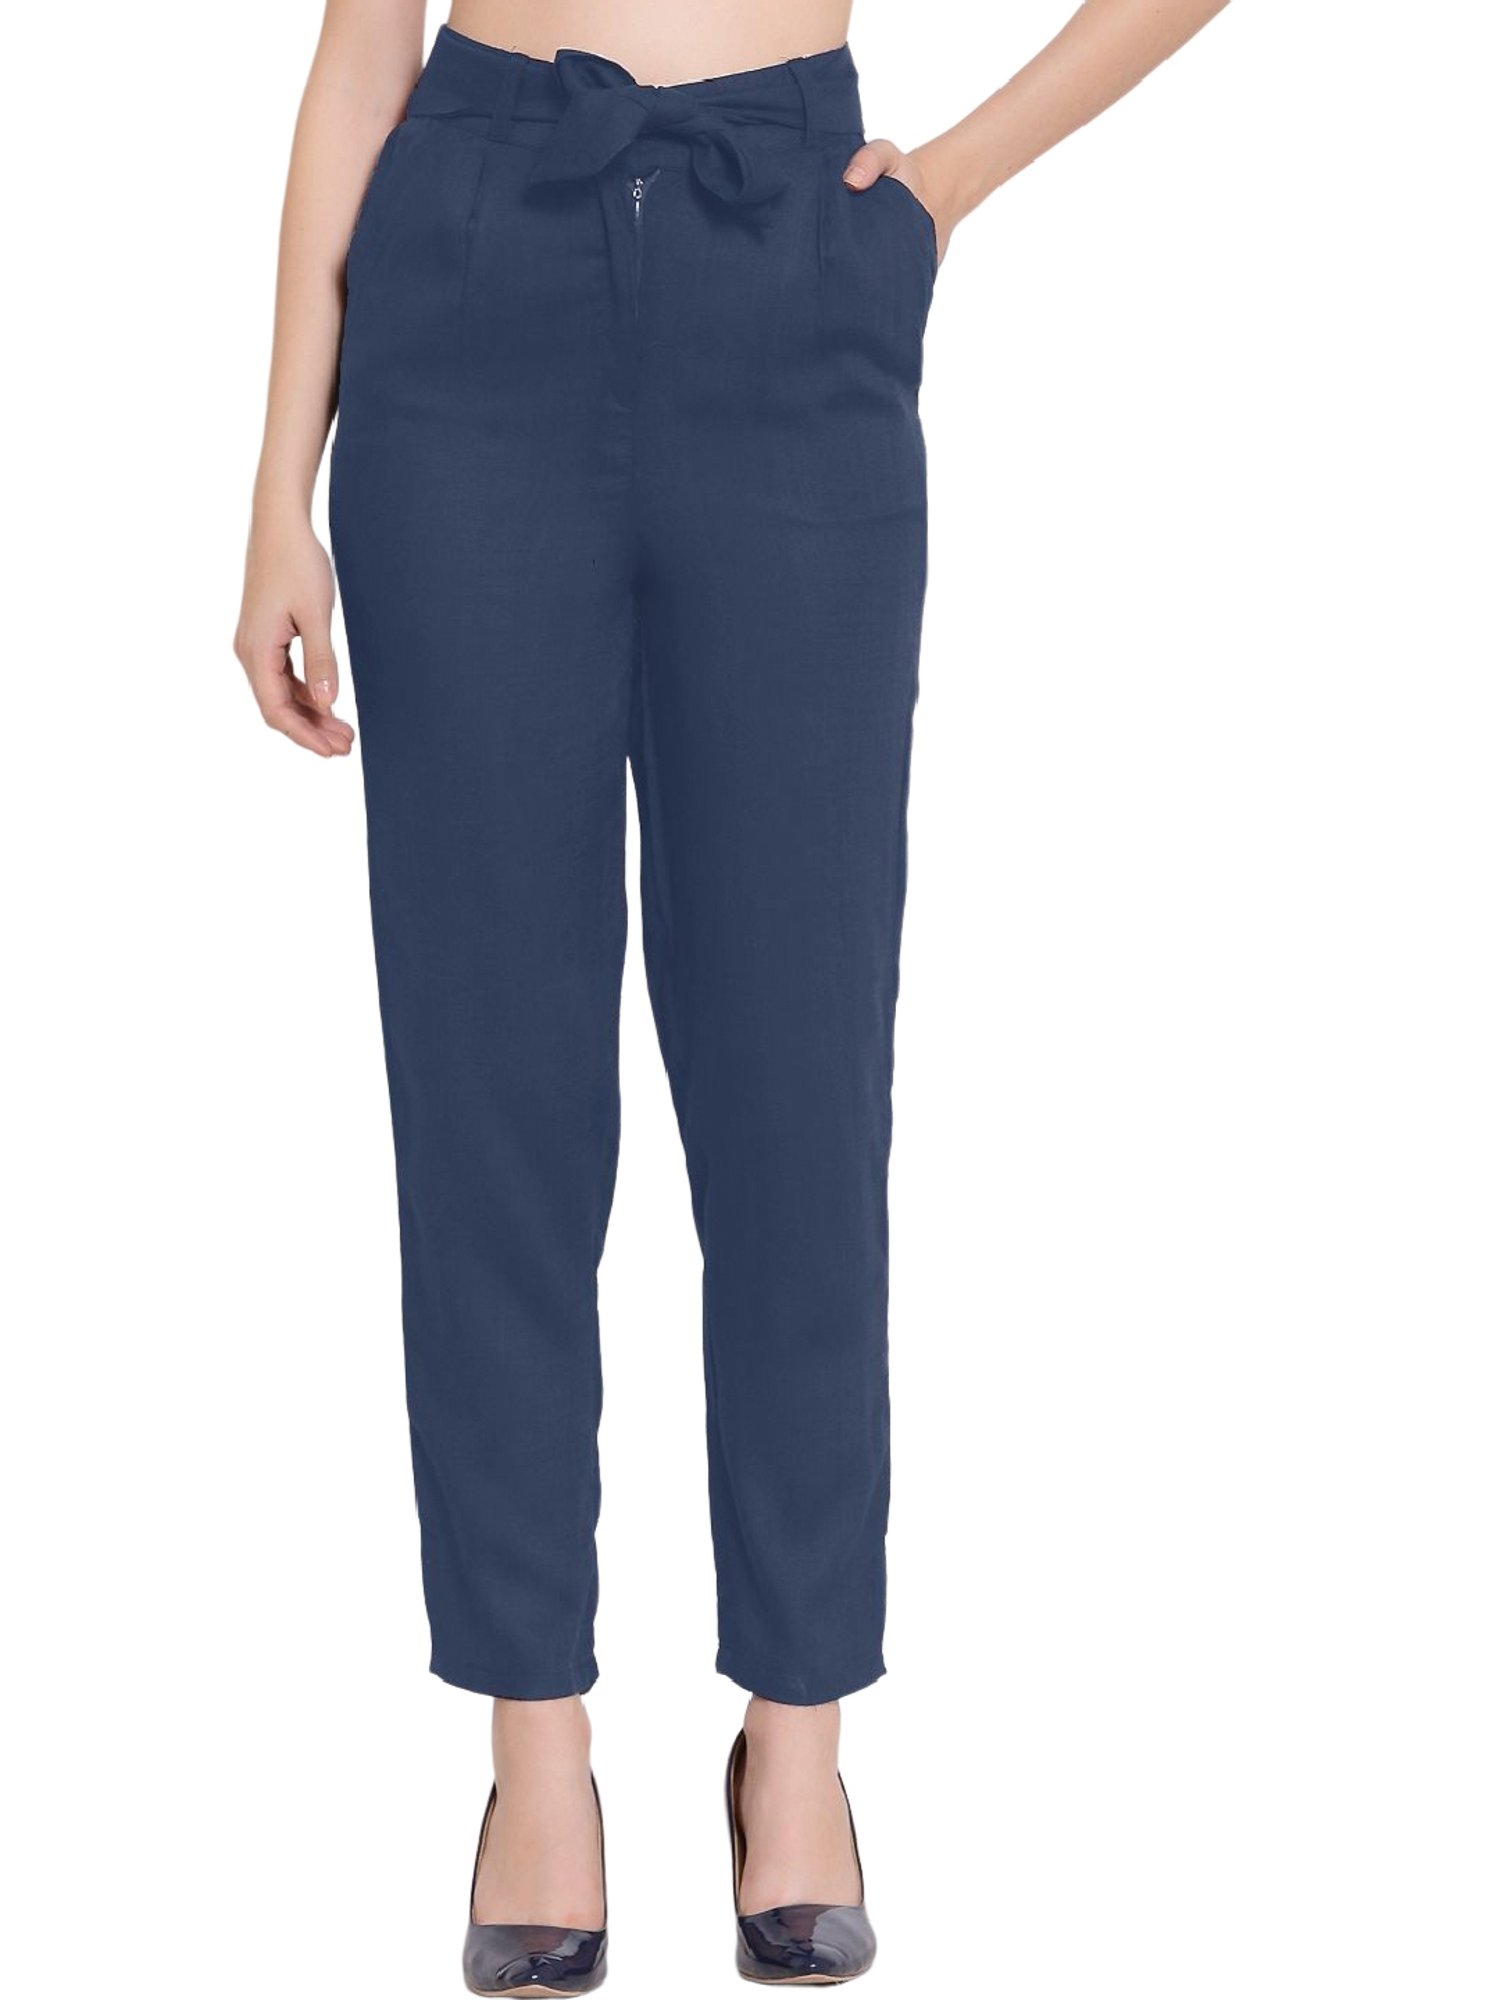 Buy INDYA Women Navy Blue Straight Fit Self Design Cigarette Trousers   Trousers for Women 2452377  Myntra